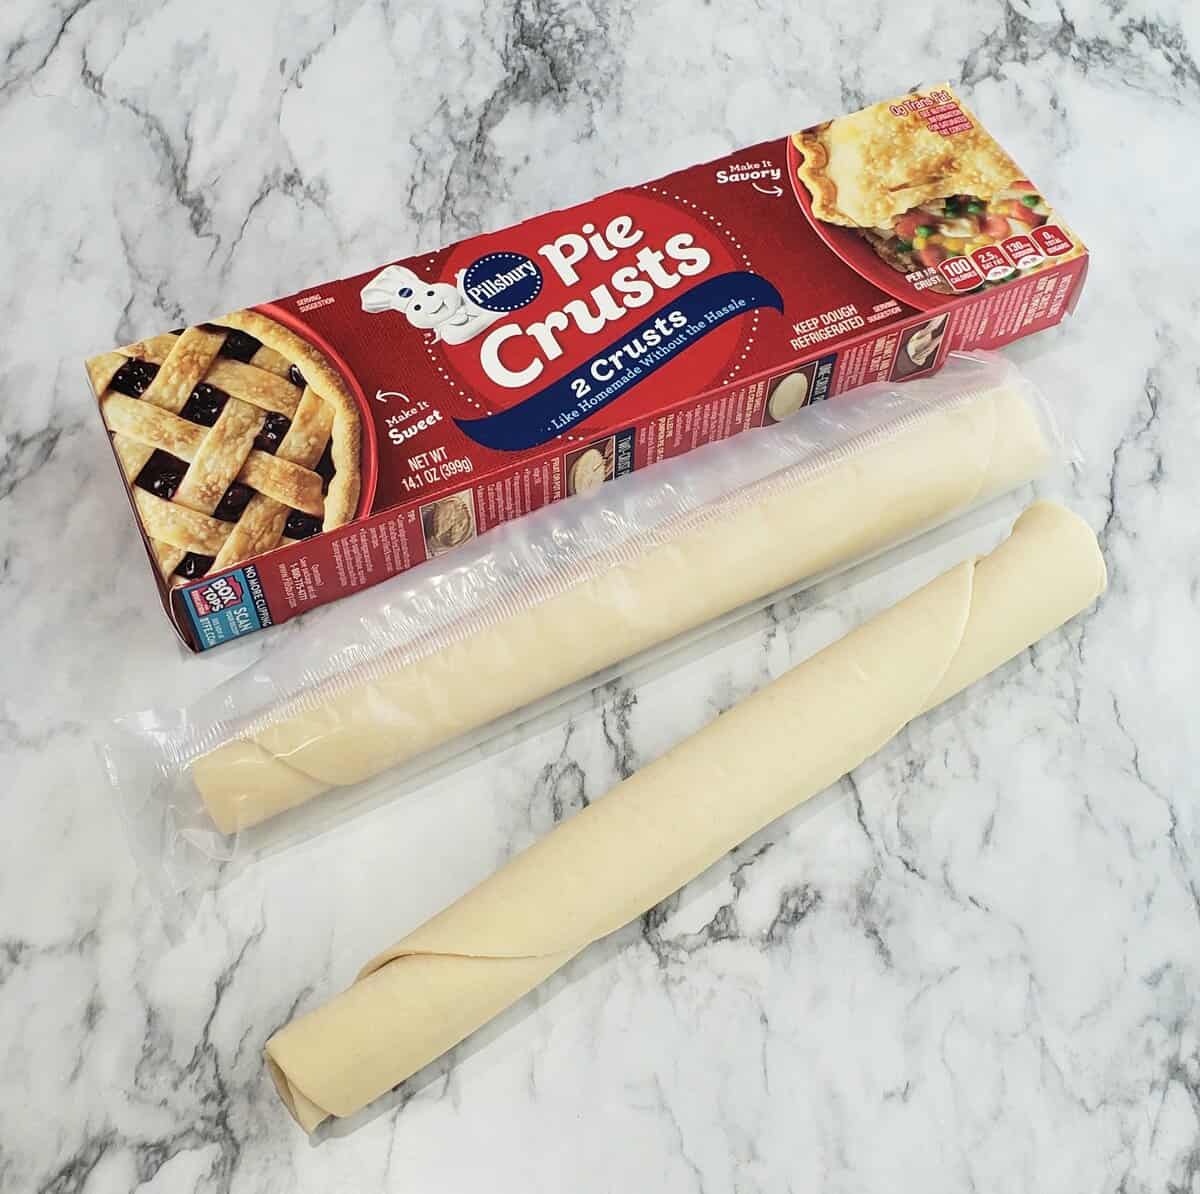 Pillsbury refrigerated pie dough rolled up with box beside 2 rolls